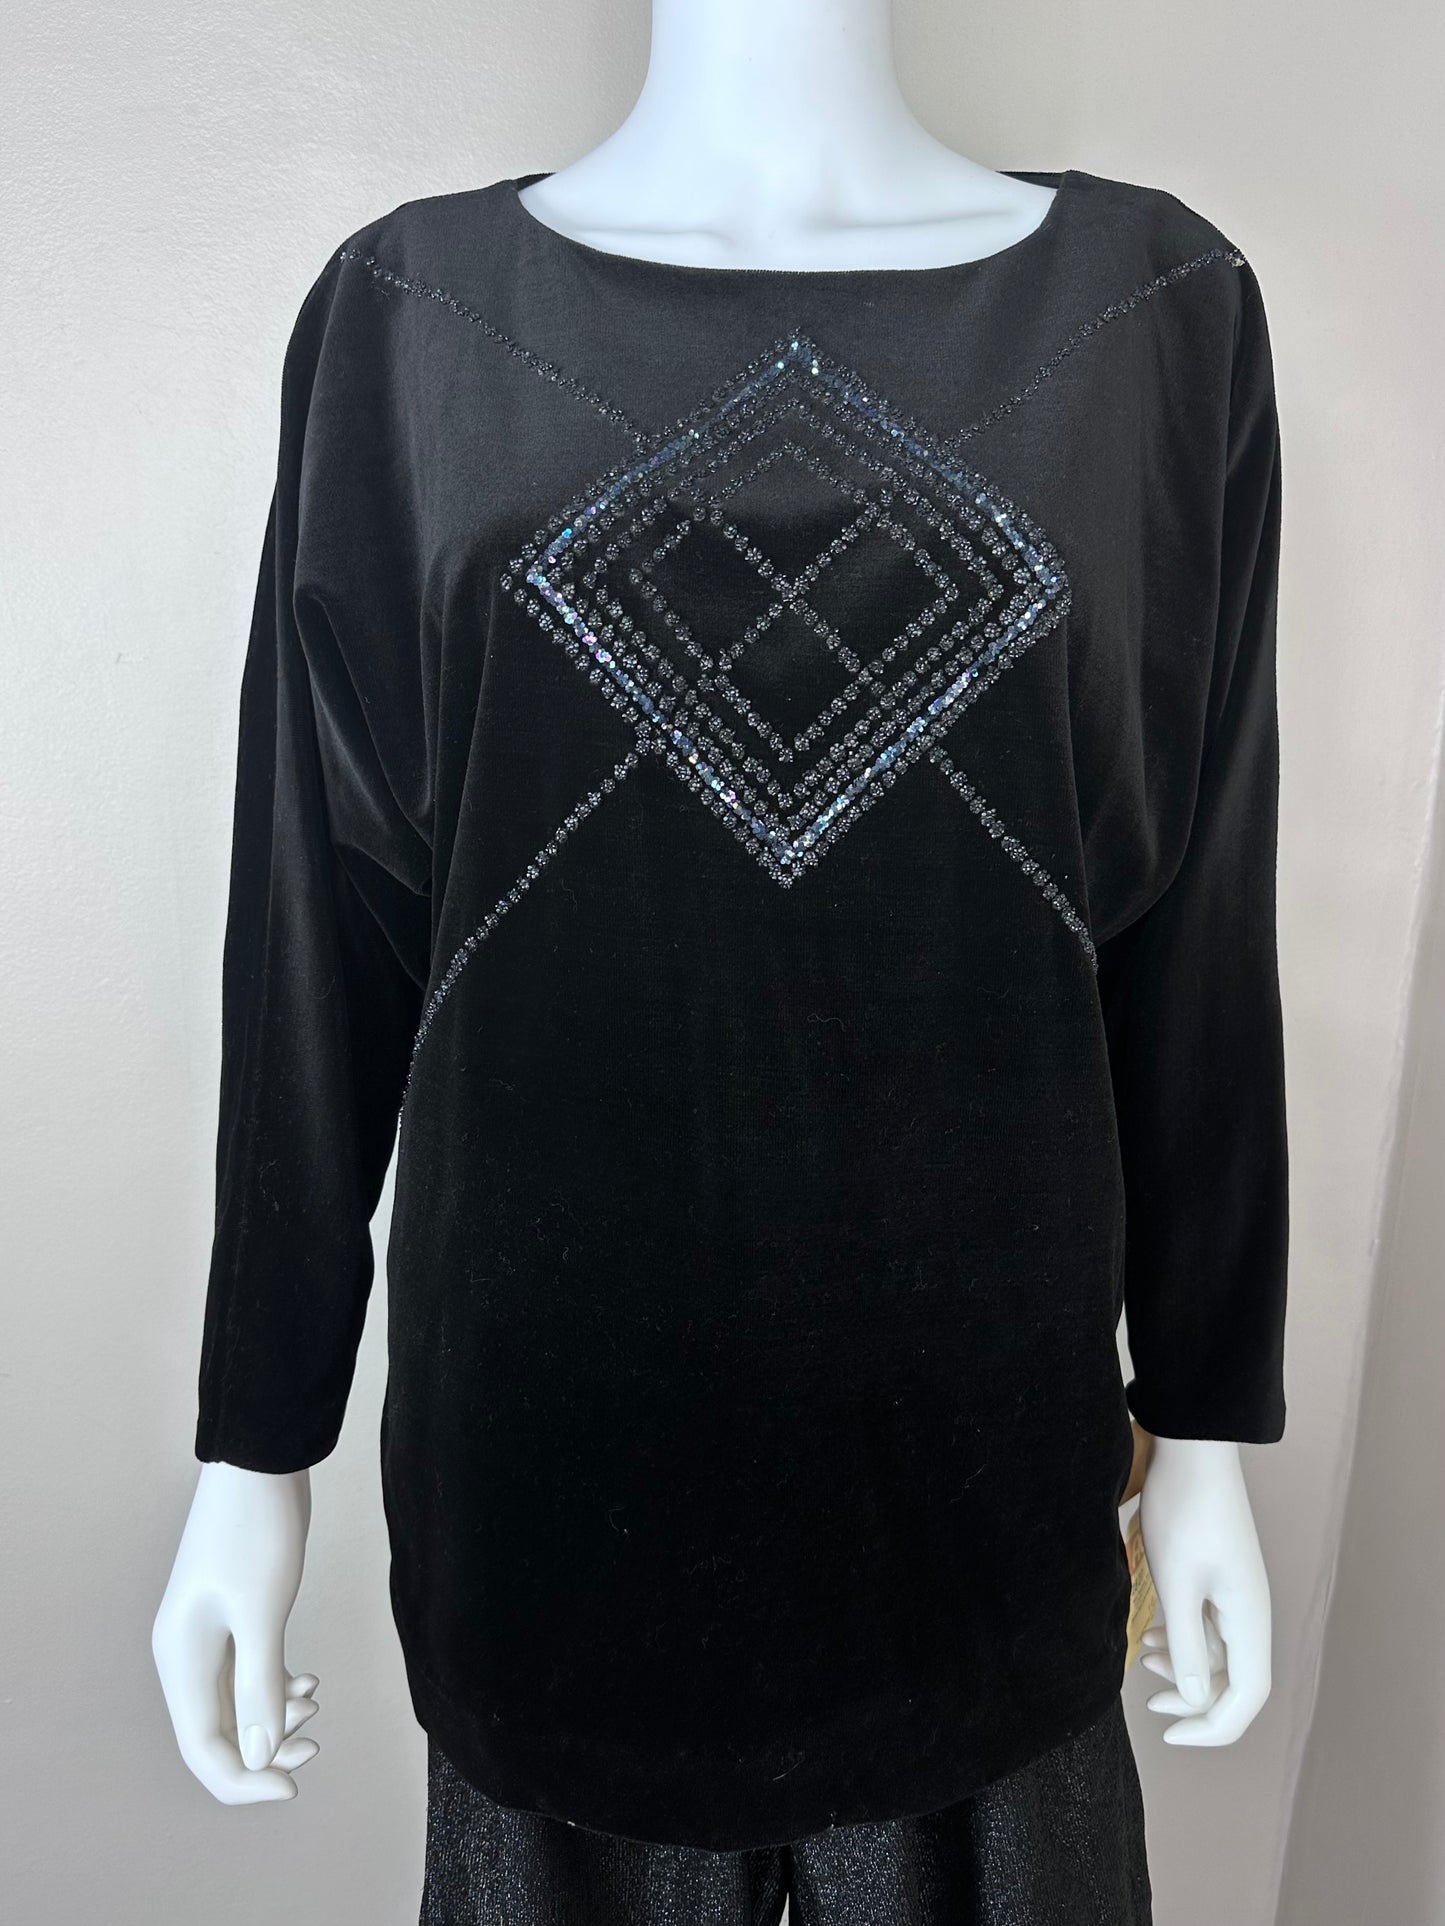 1970s Black Velvet Top with Glitter Design, Act III Size M/L, Deadstock with Tags